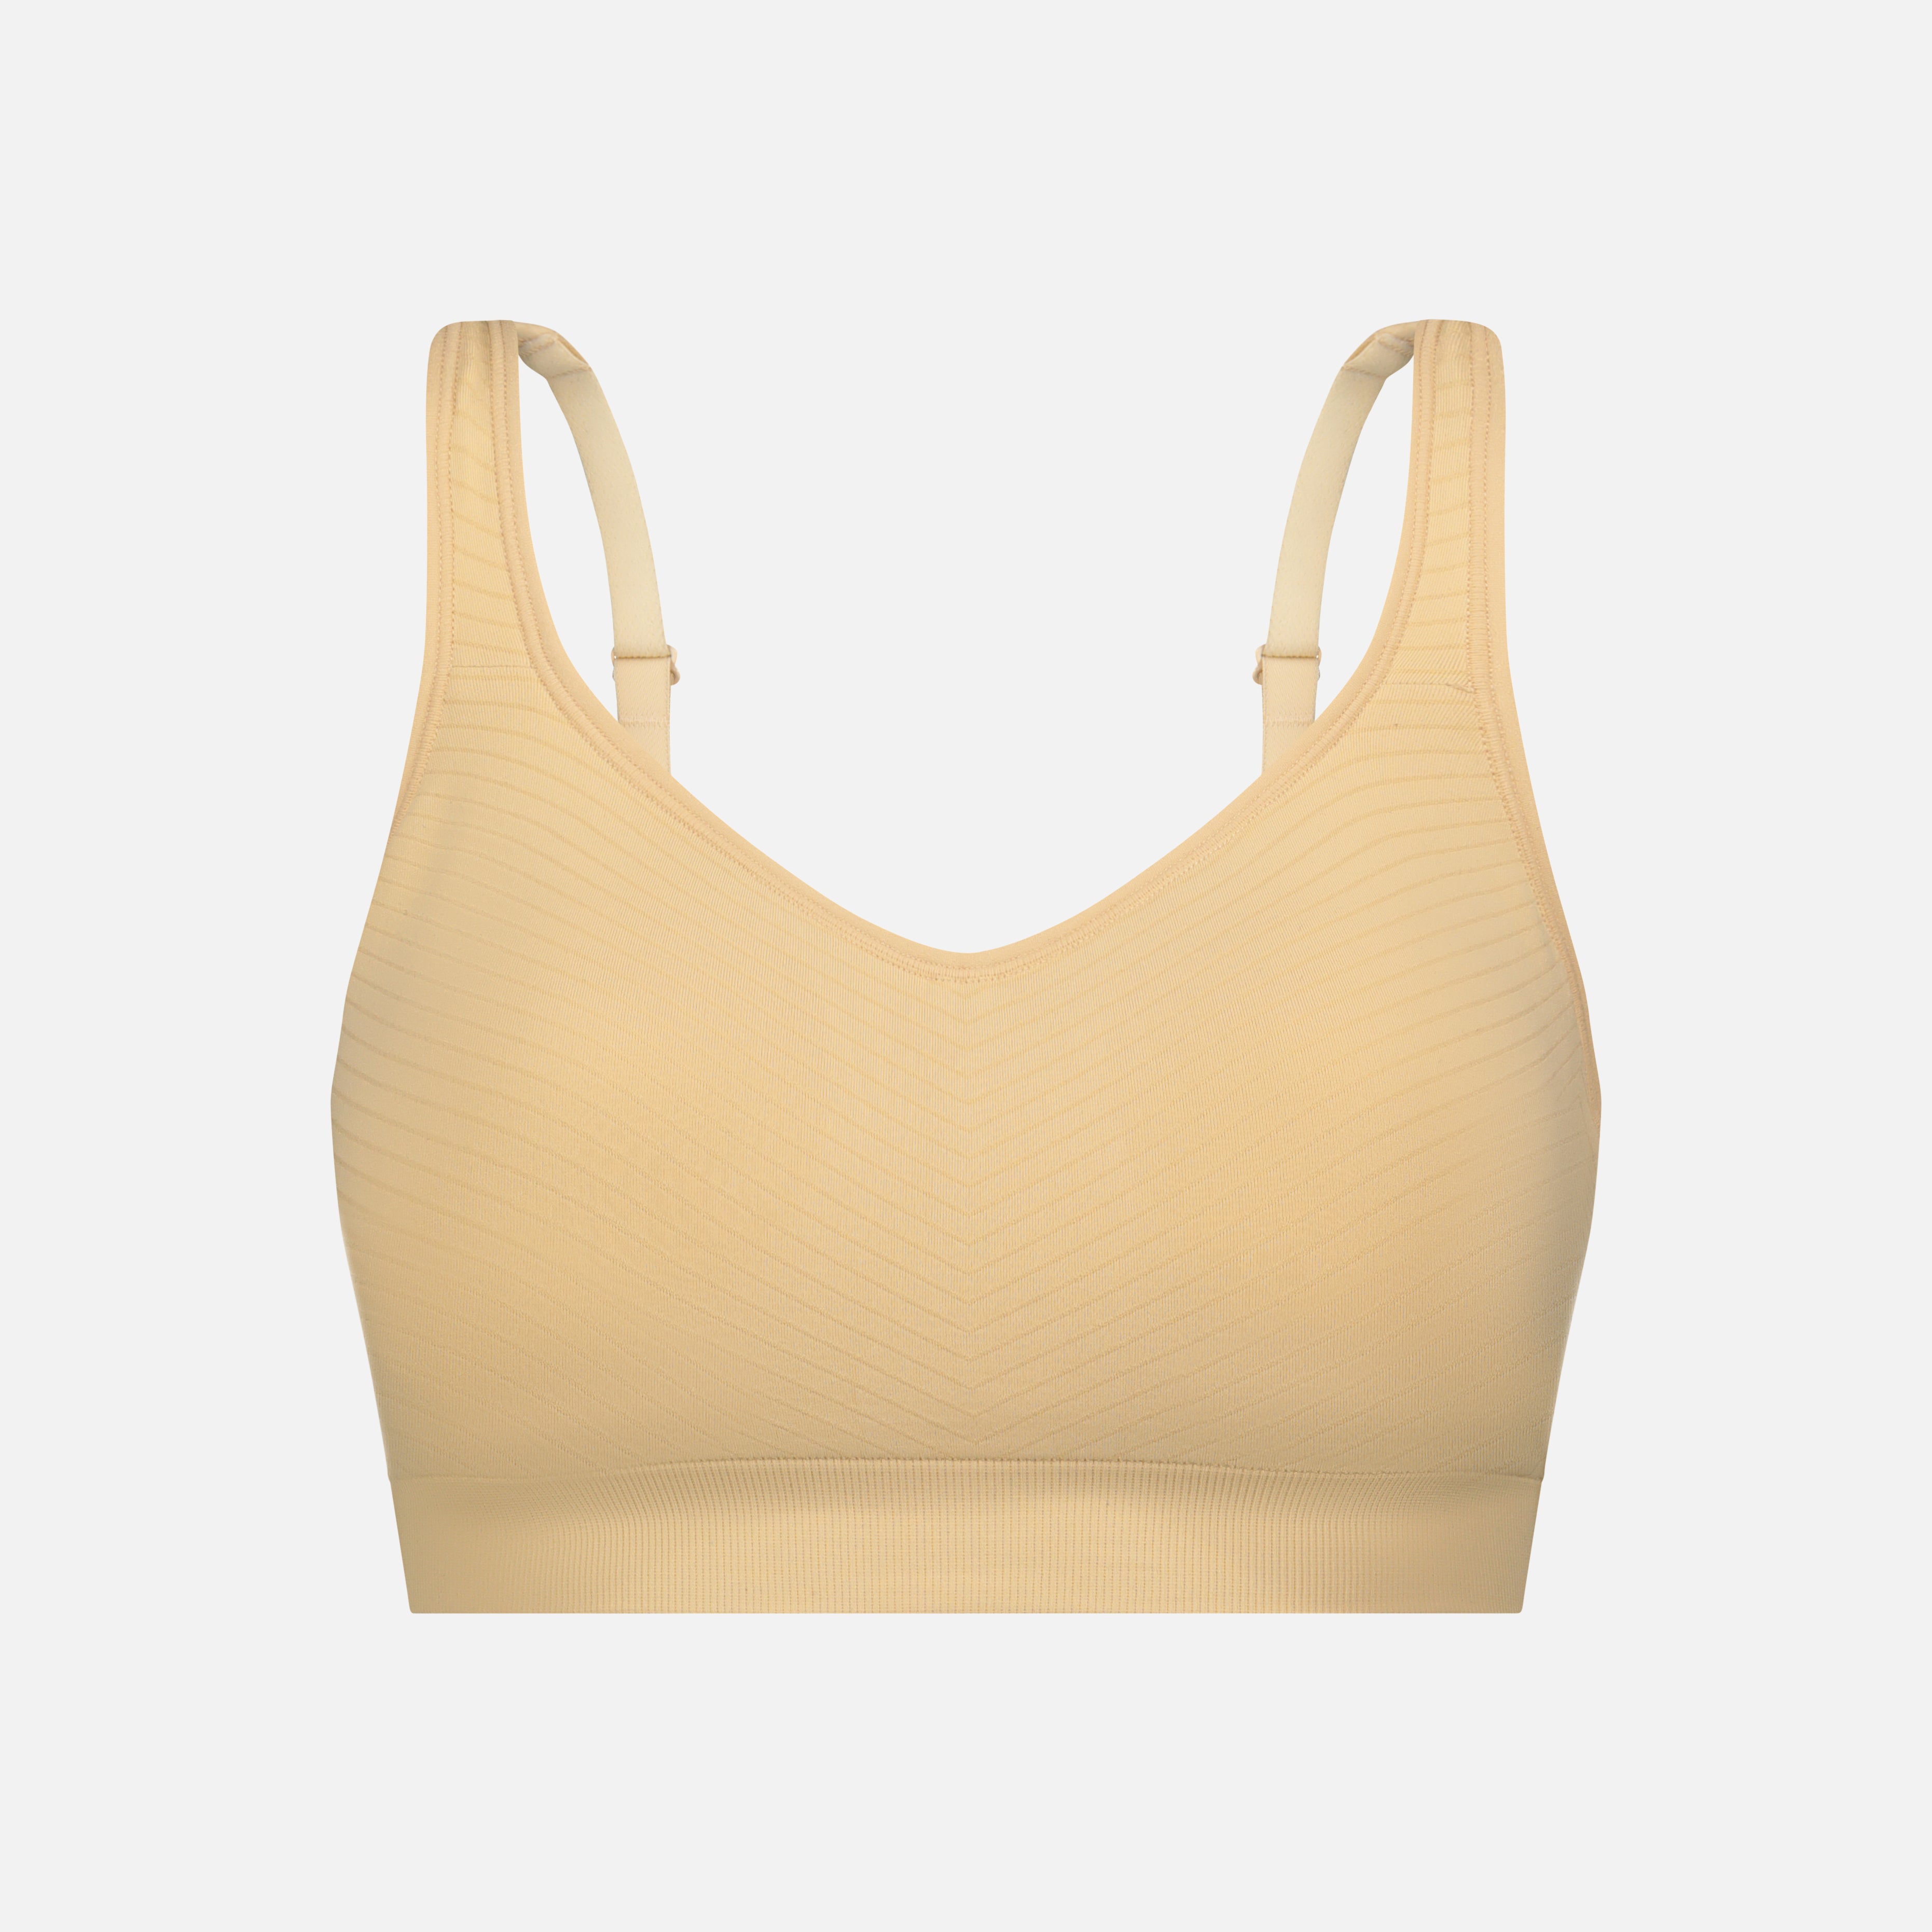 The Comfort Shaping Bra with Adjustable Straps (Stripes)